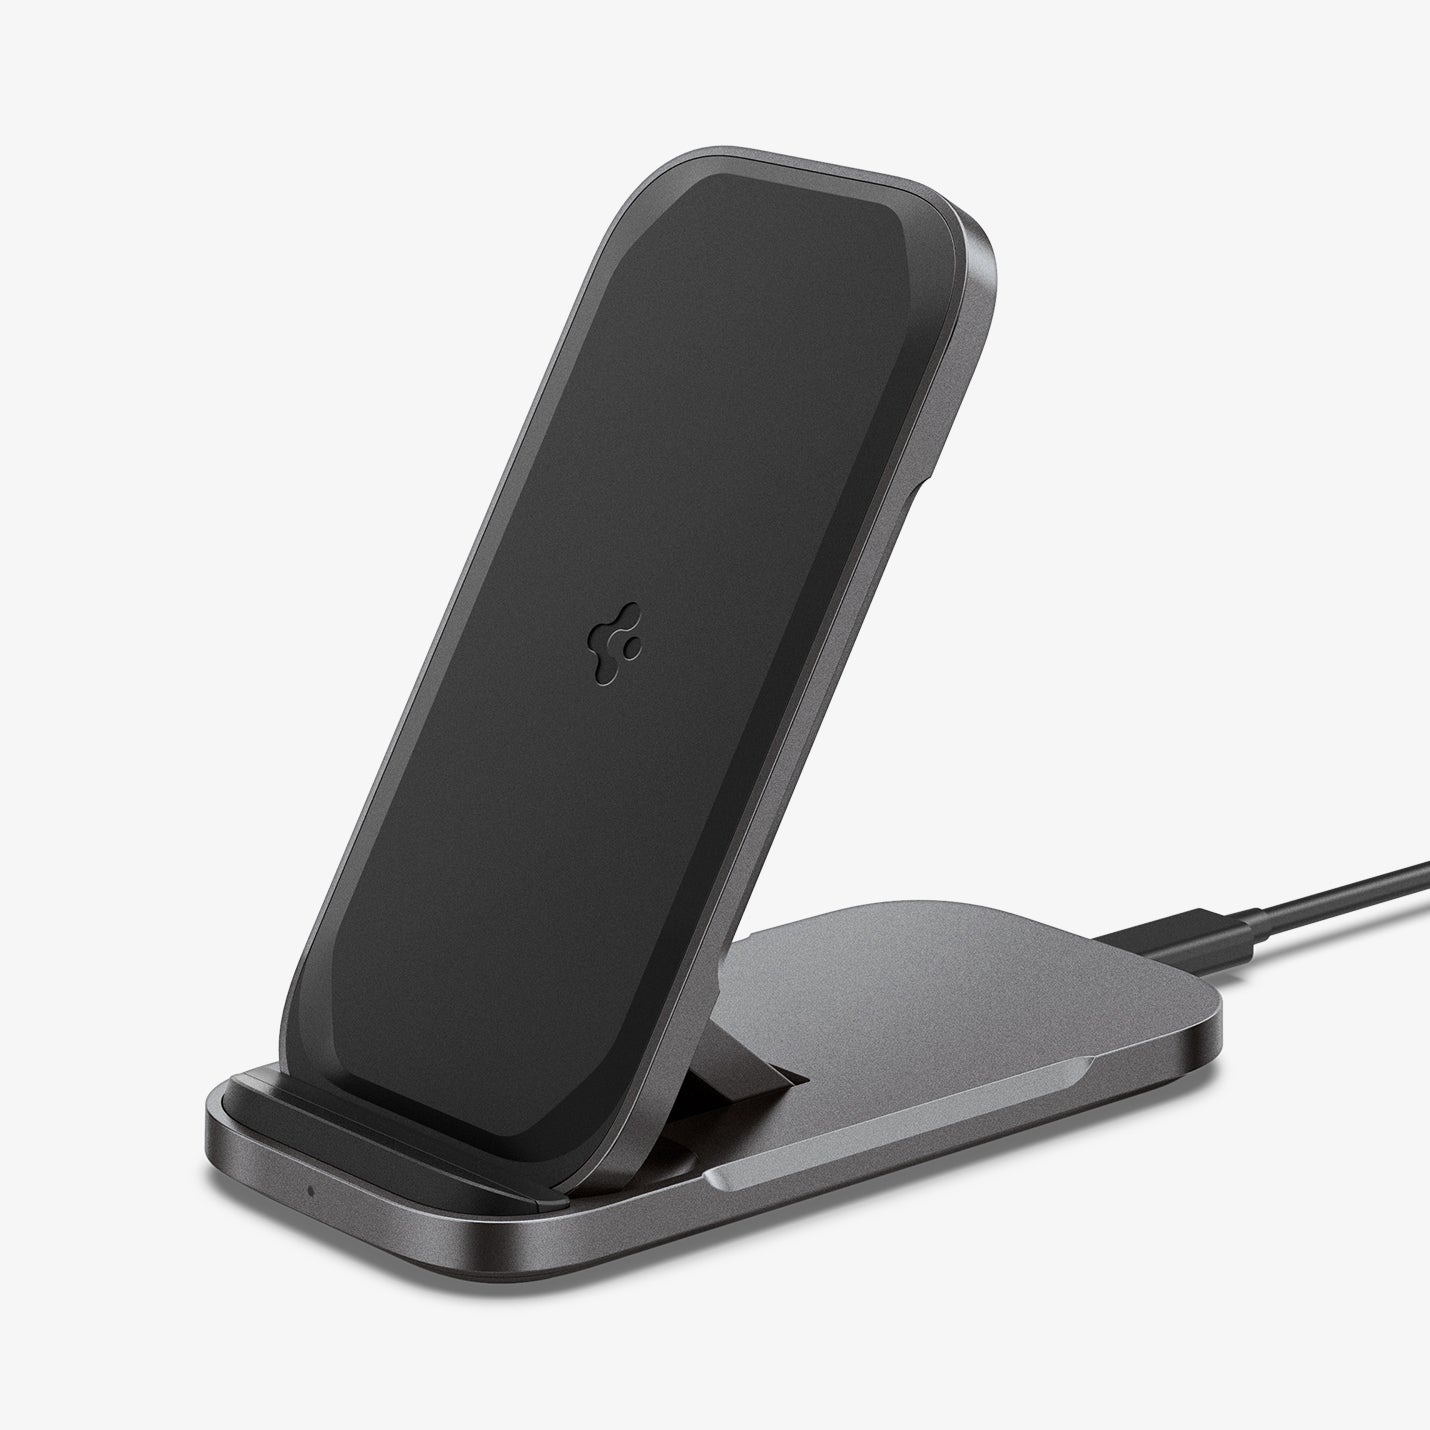 ACH04622 - ArcField™ Flex Wireless Charger PF2201 in black showing the front and side